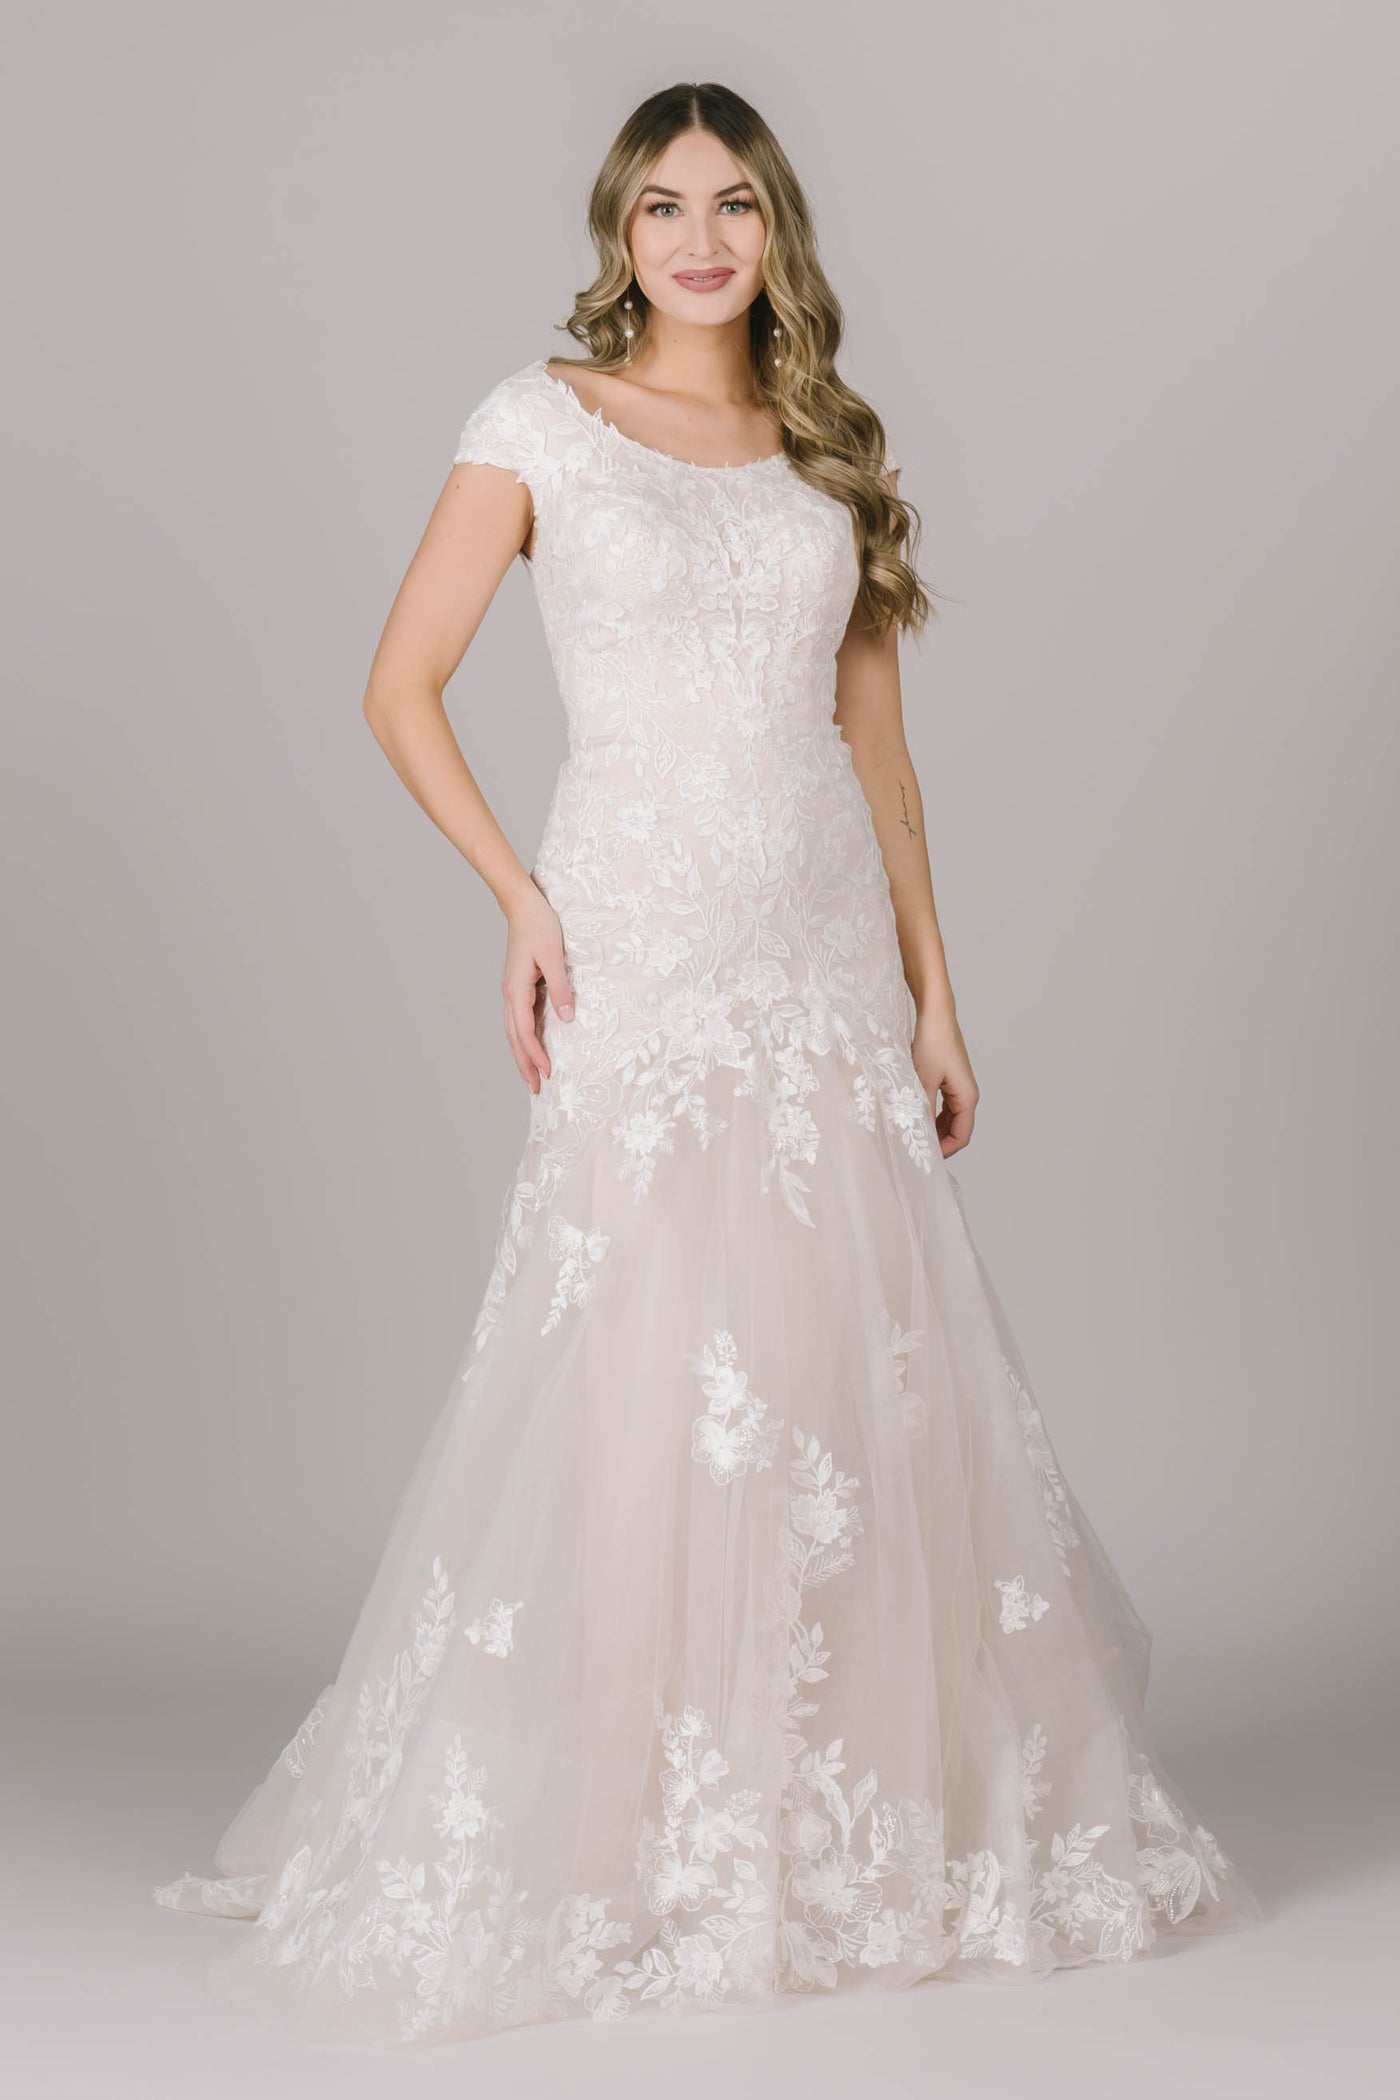 Another angle of a modest wedding dress with a fitted silhouette, cap sleeves, and a wide scoop neckline.